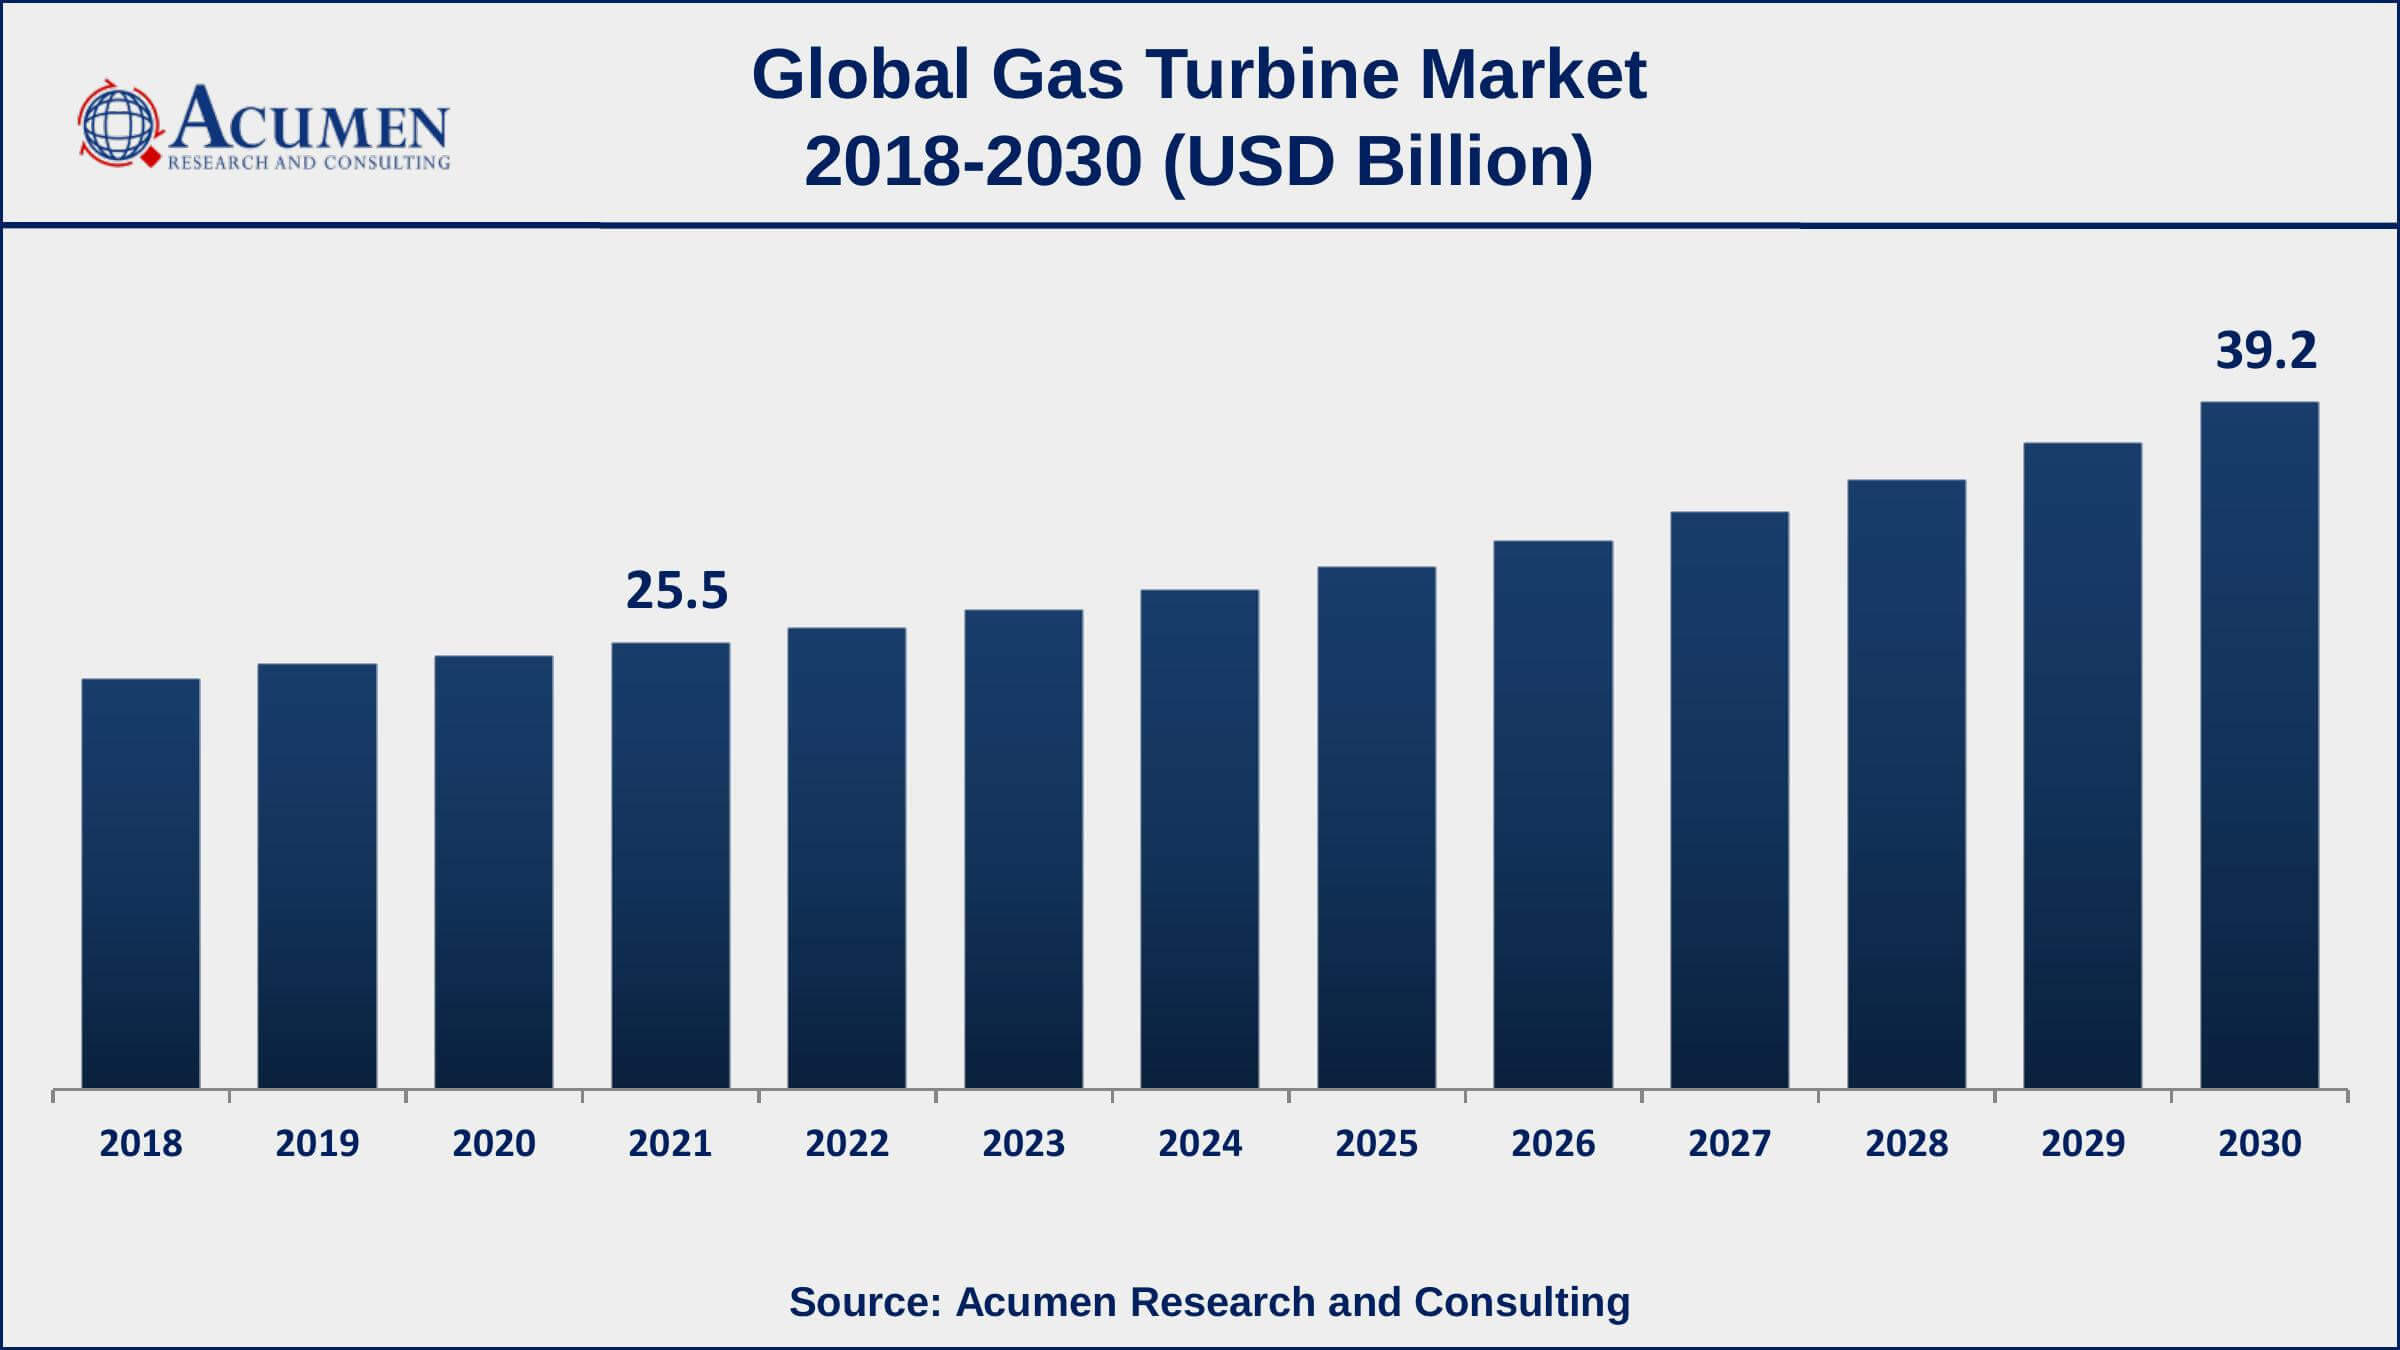 Asia-Pacific region led with more than 31% gas turbine market share in 2021